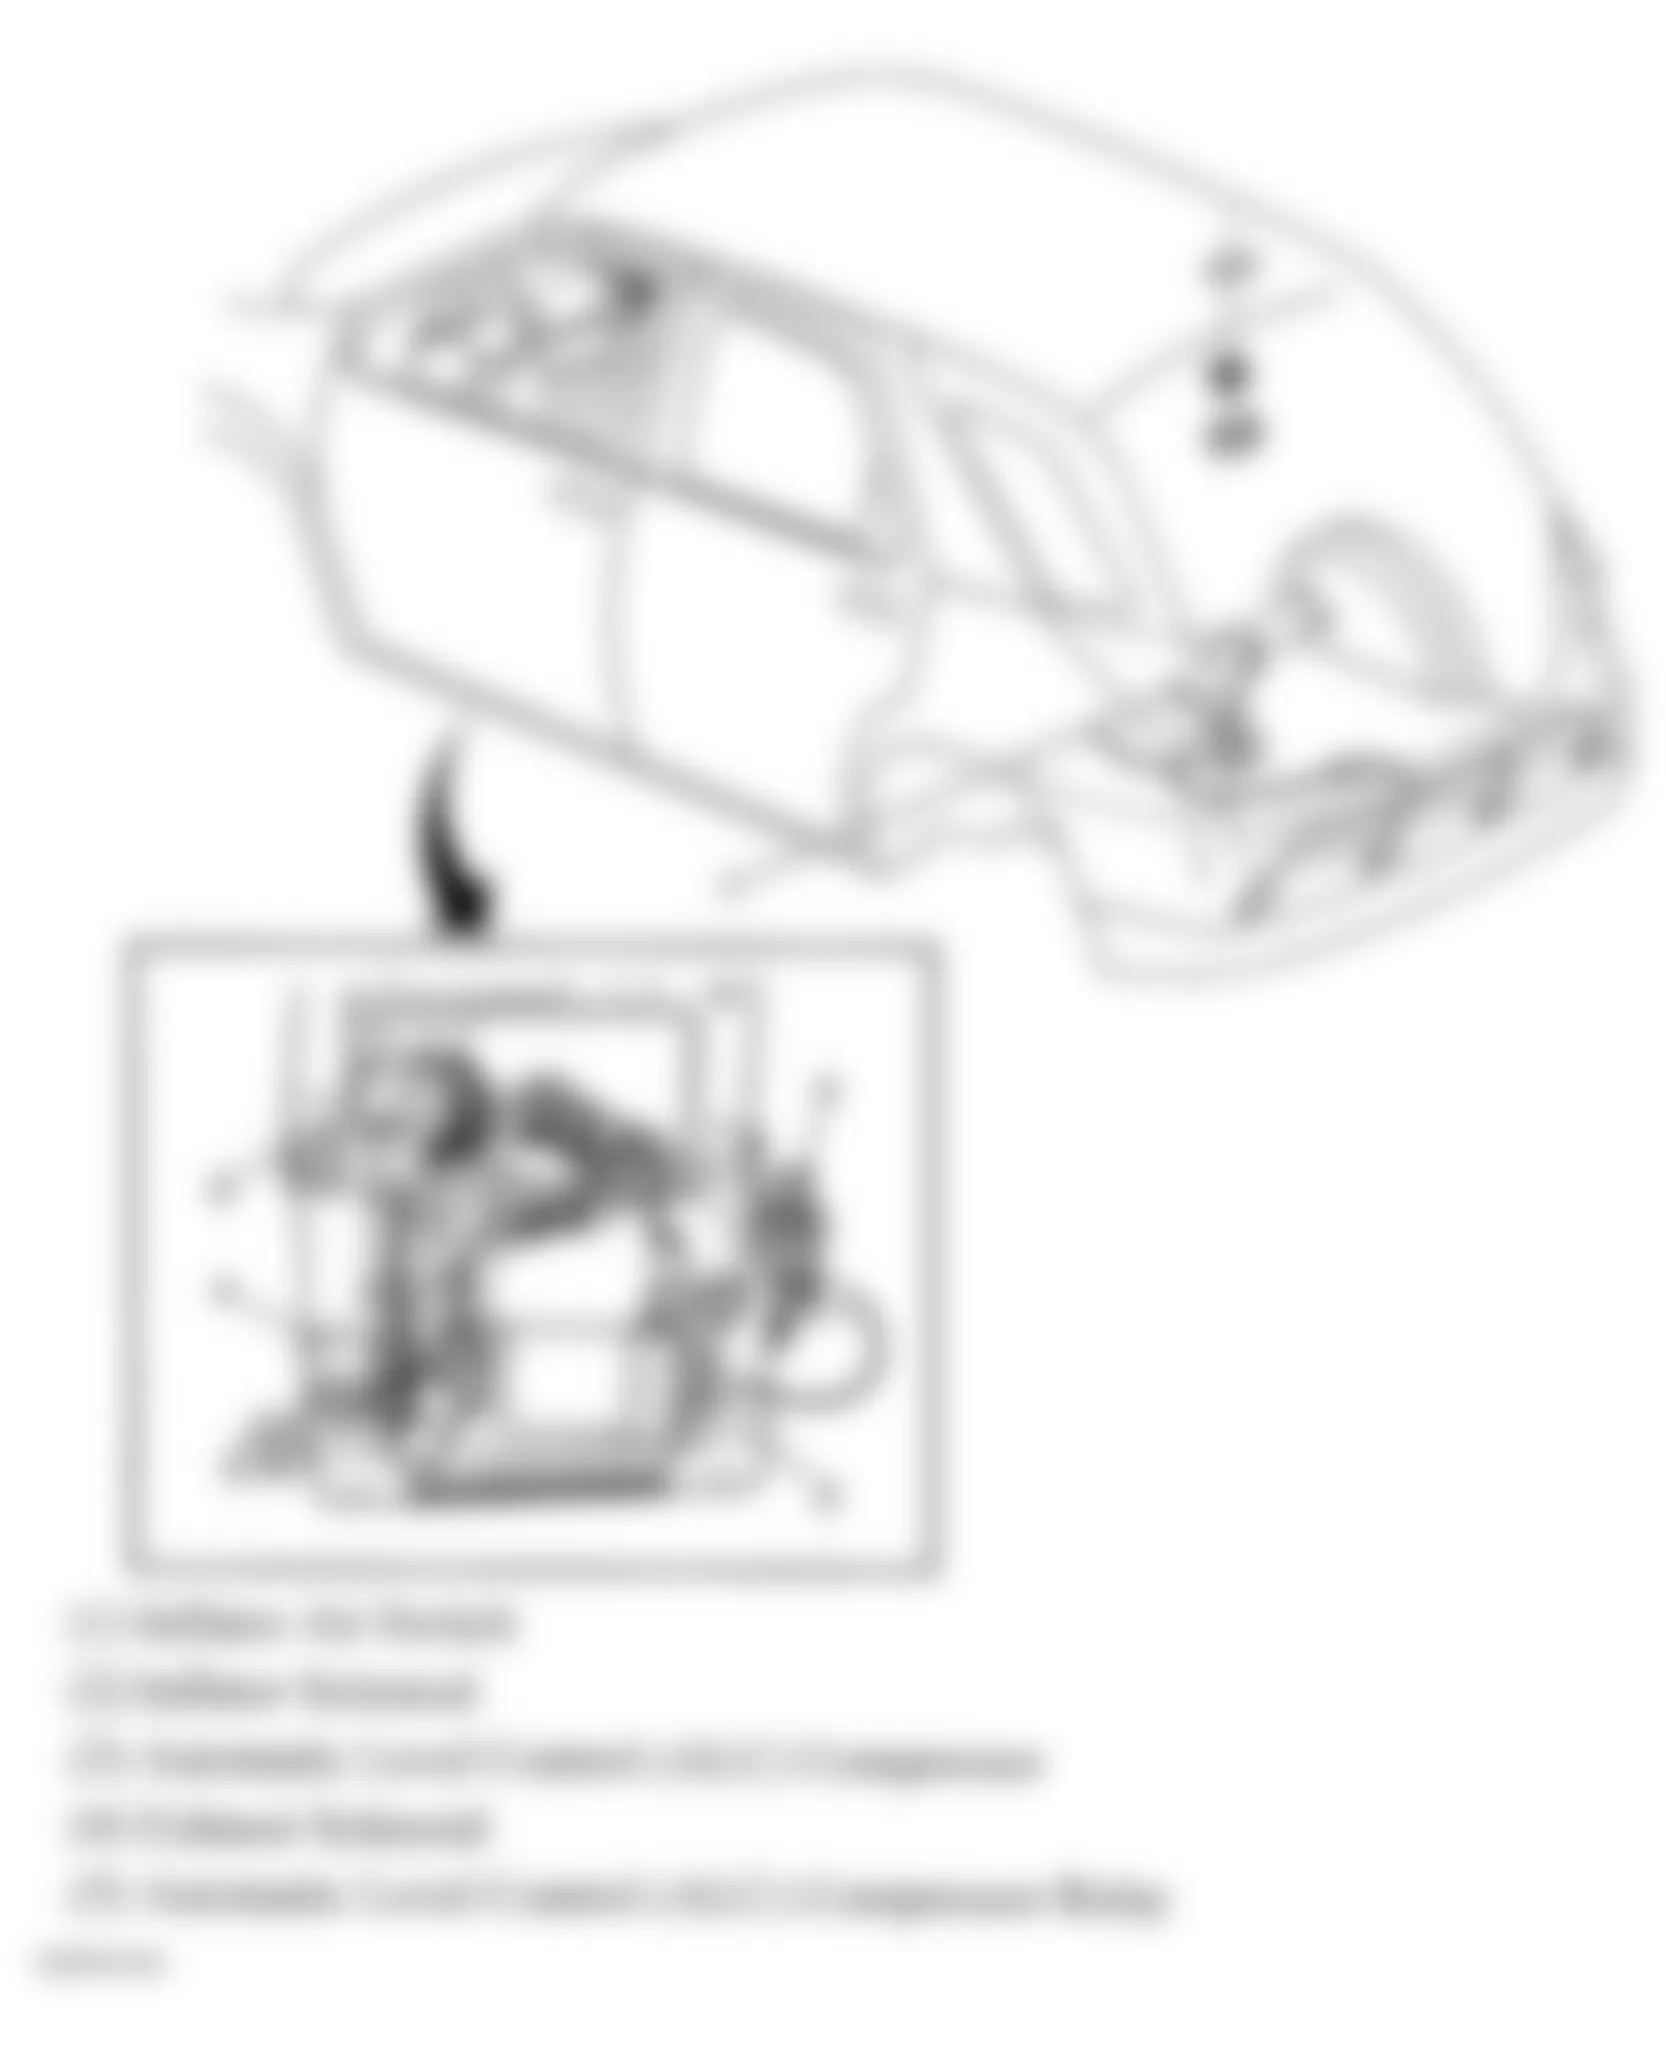 Buick Rendezvous CXL 2005 - Component Locations -  Rear Of Vehicle